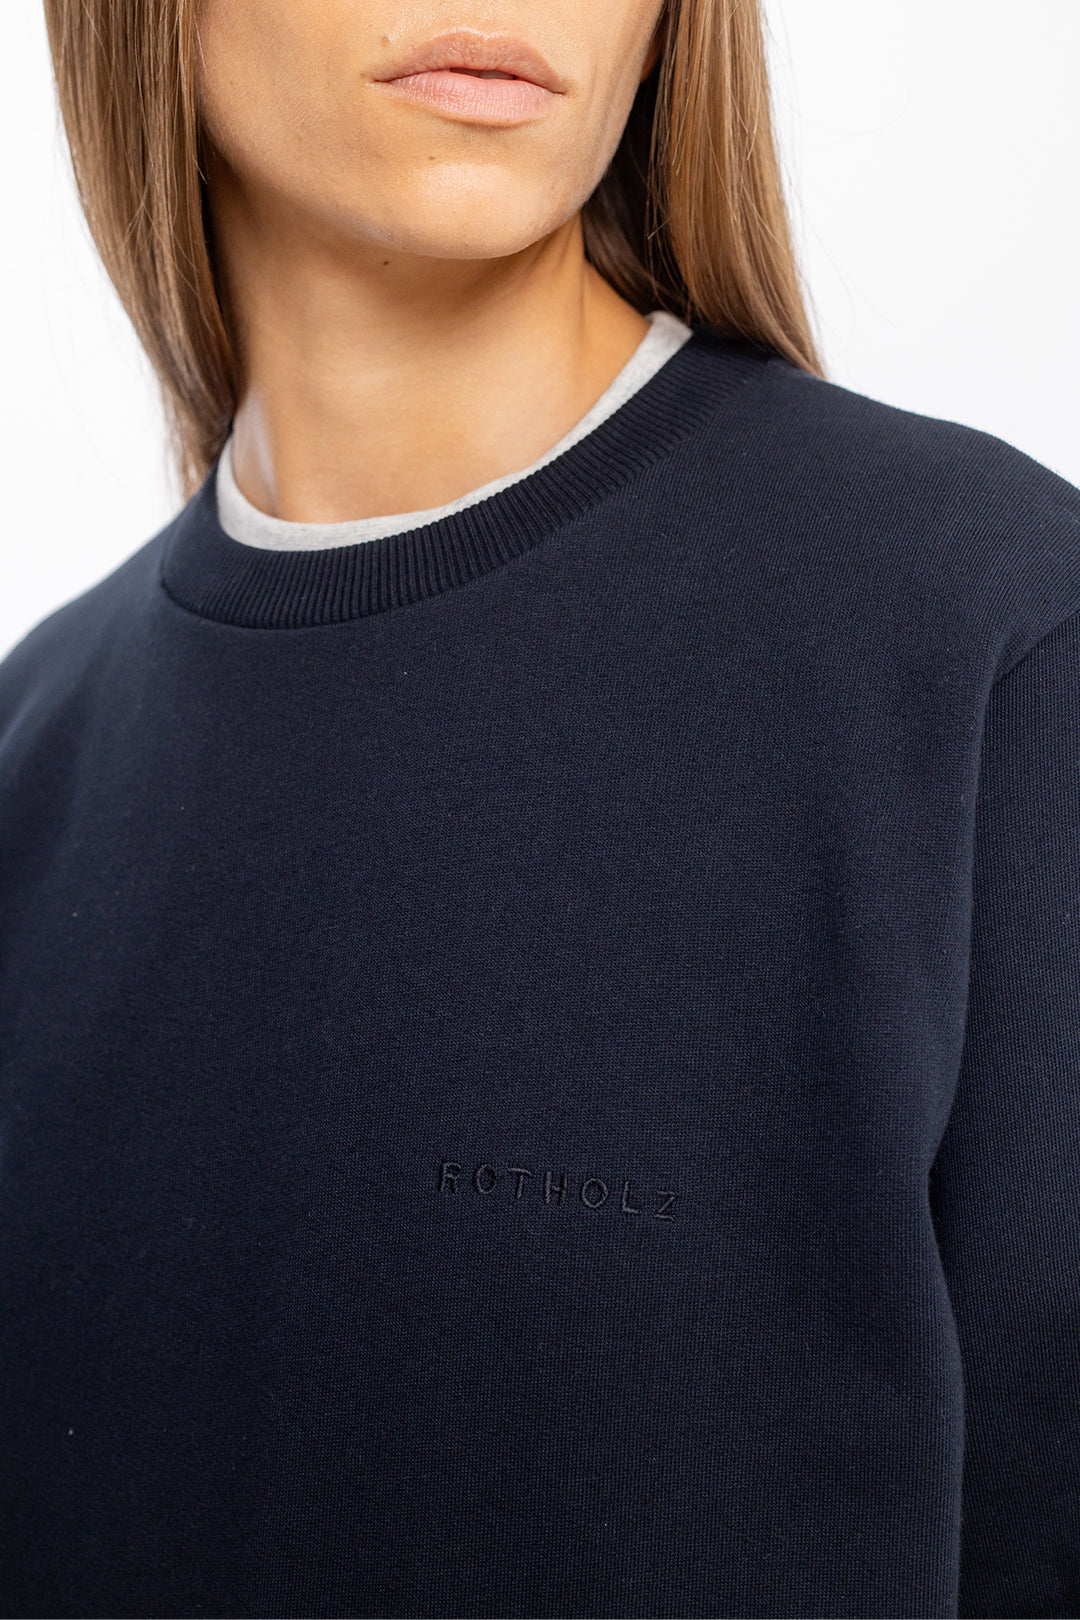 Black sweater logo made of organic cotton from Rotholz